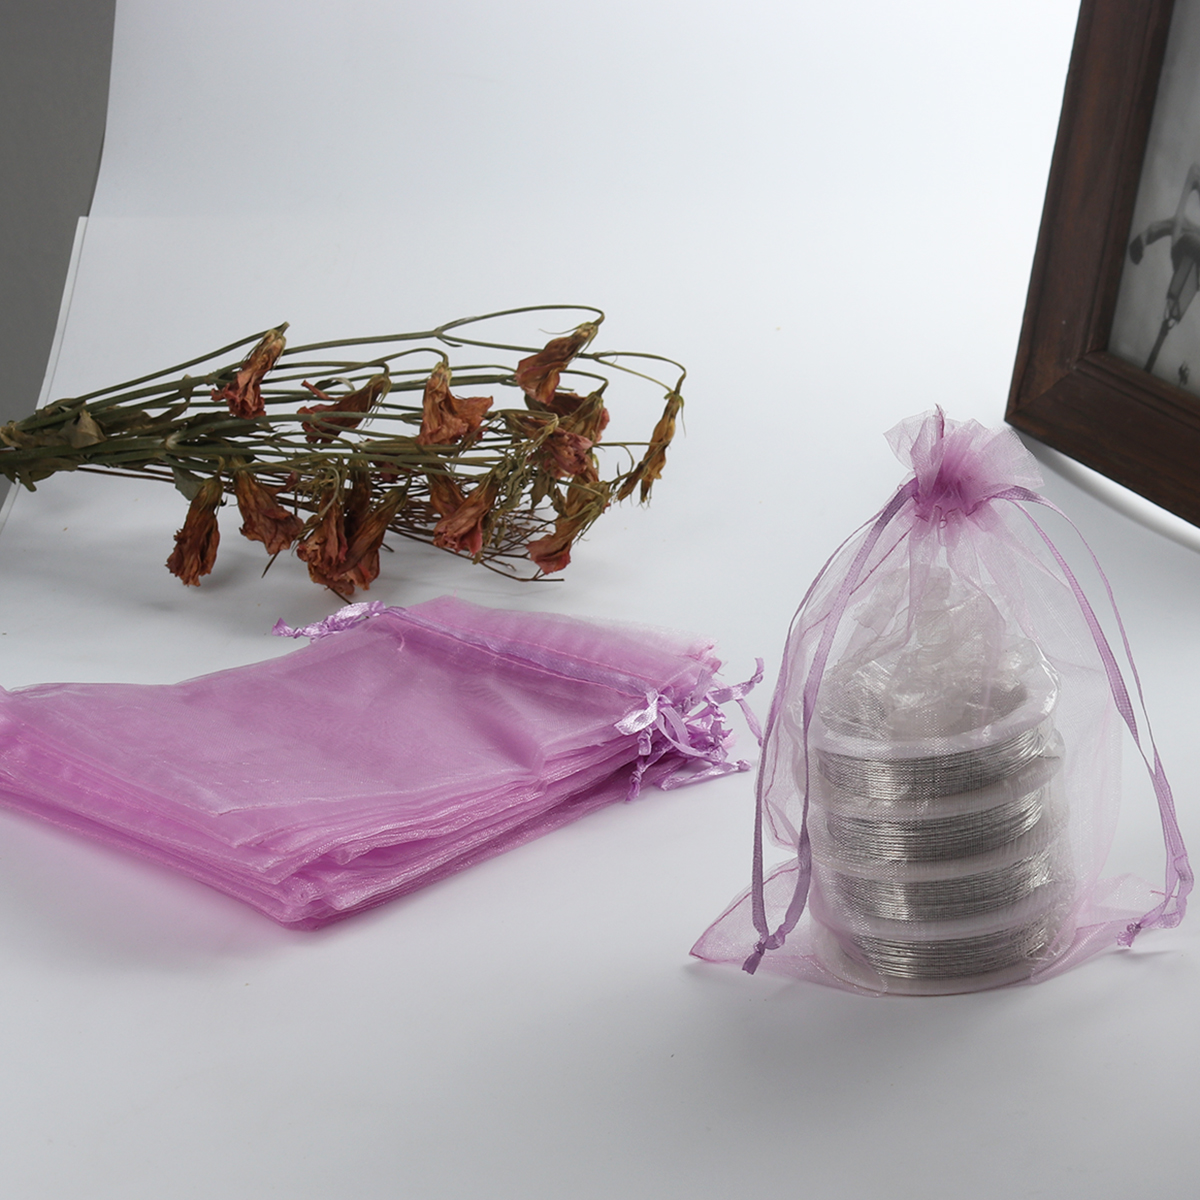 Picture of Wedding Gift Organza Jewelry Bags Drawstring Rectangle Mauve (Usable Space: 15.5x12.5cm) 18cm x 12.8cm, 20 PCs